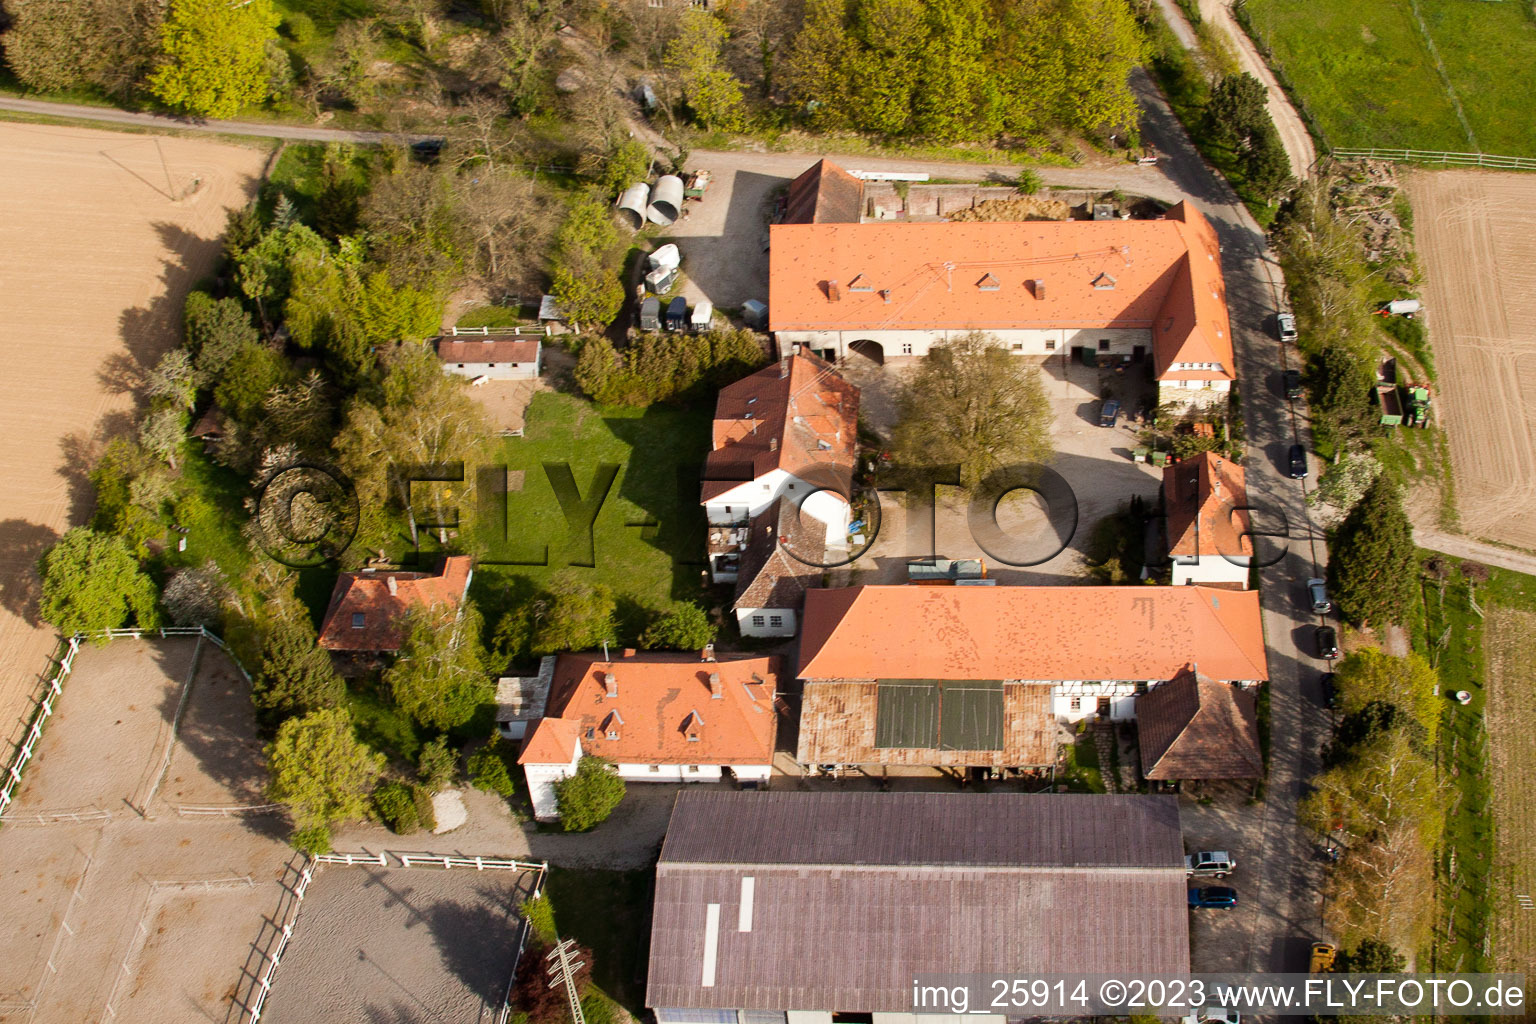 Rittnerthof in the district Durlach in Karlsruhe in the state Baden-Wuerttemberg, Germany seen from a drone